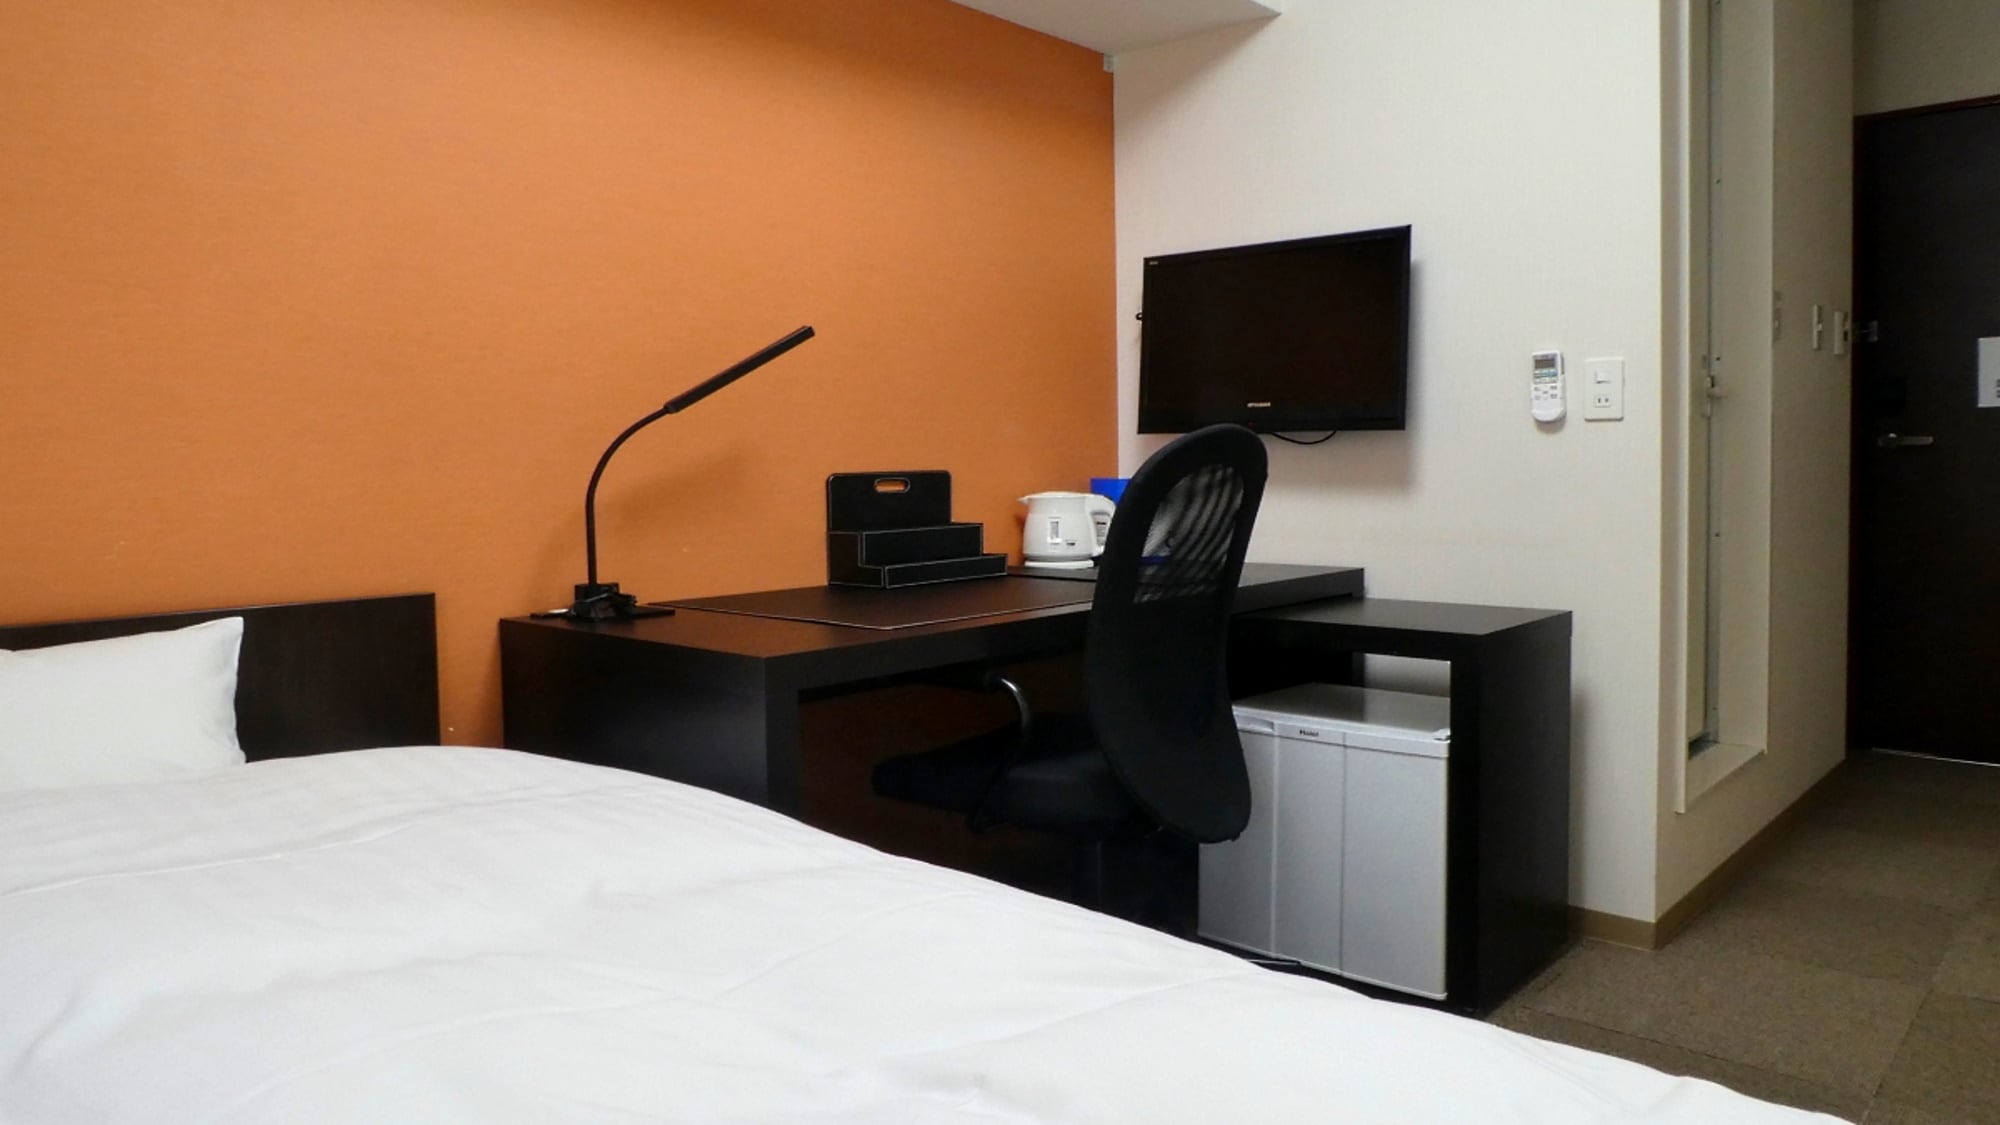 Business single room with individual air conditioning, Wi-Fi, warm water washing toilet seat